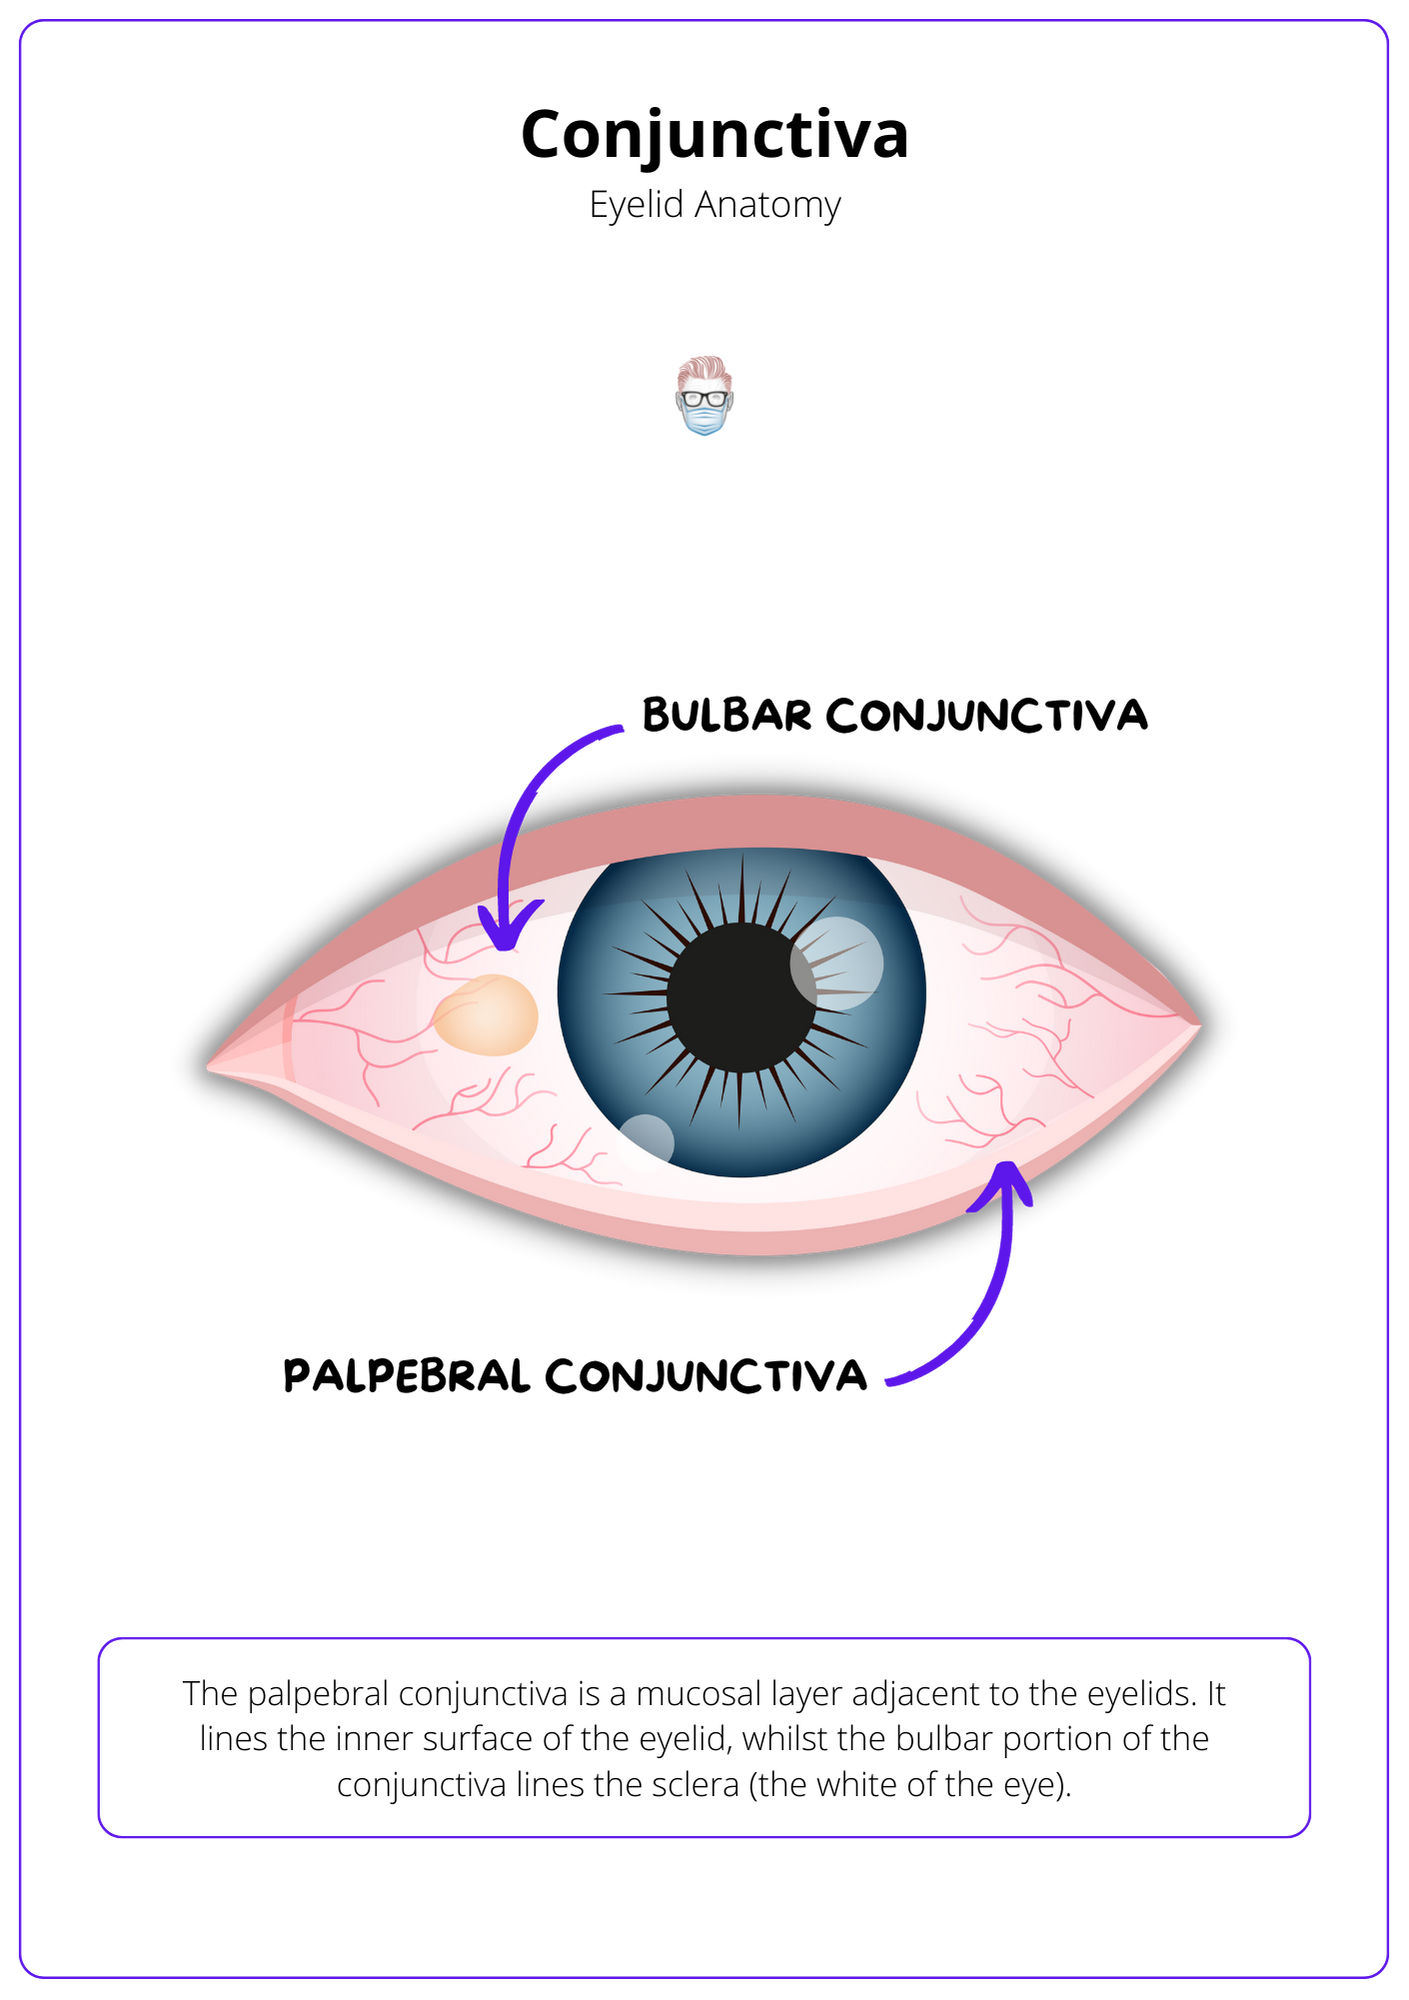 A labelled drawing of the conjunctiva with an explanation of the anatomy at the bottom of the image. Arrows point to the two different points of the conjunctiva